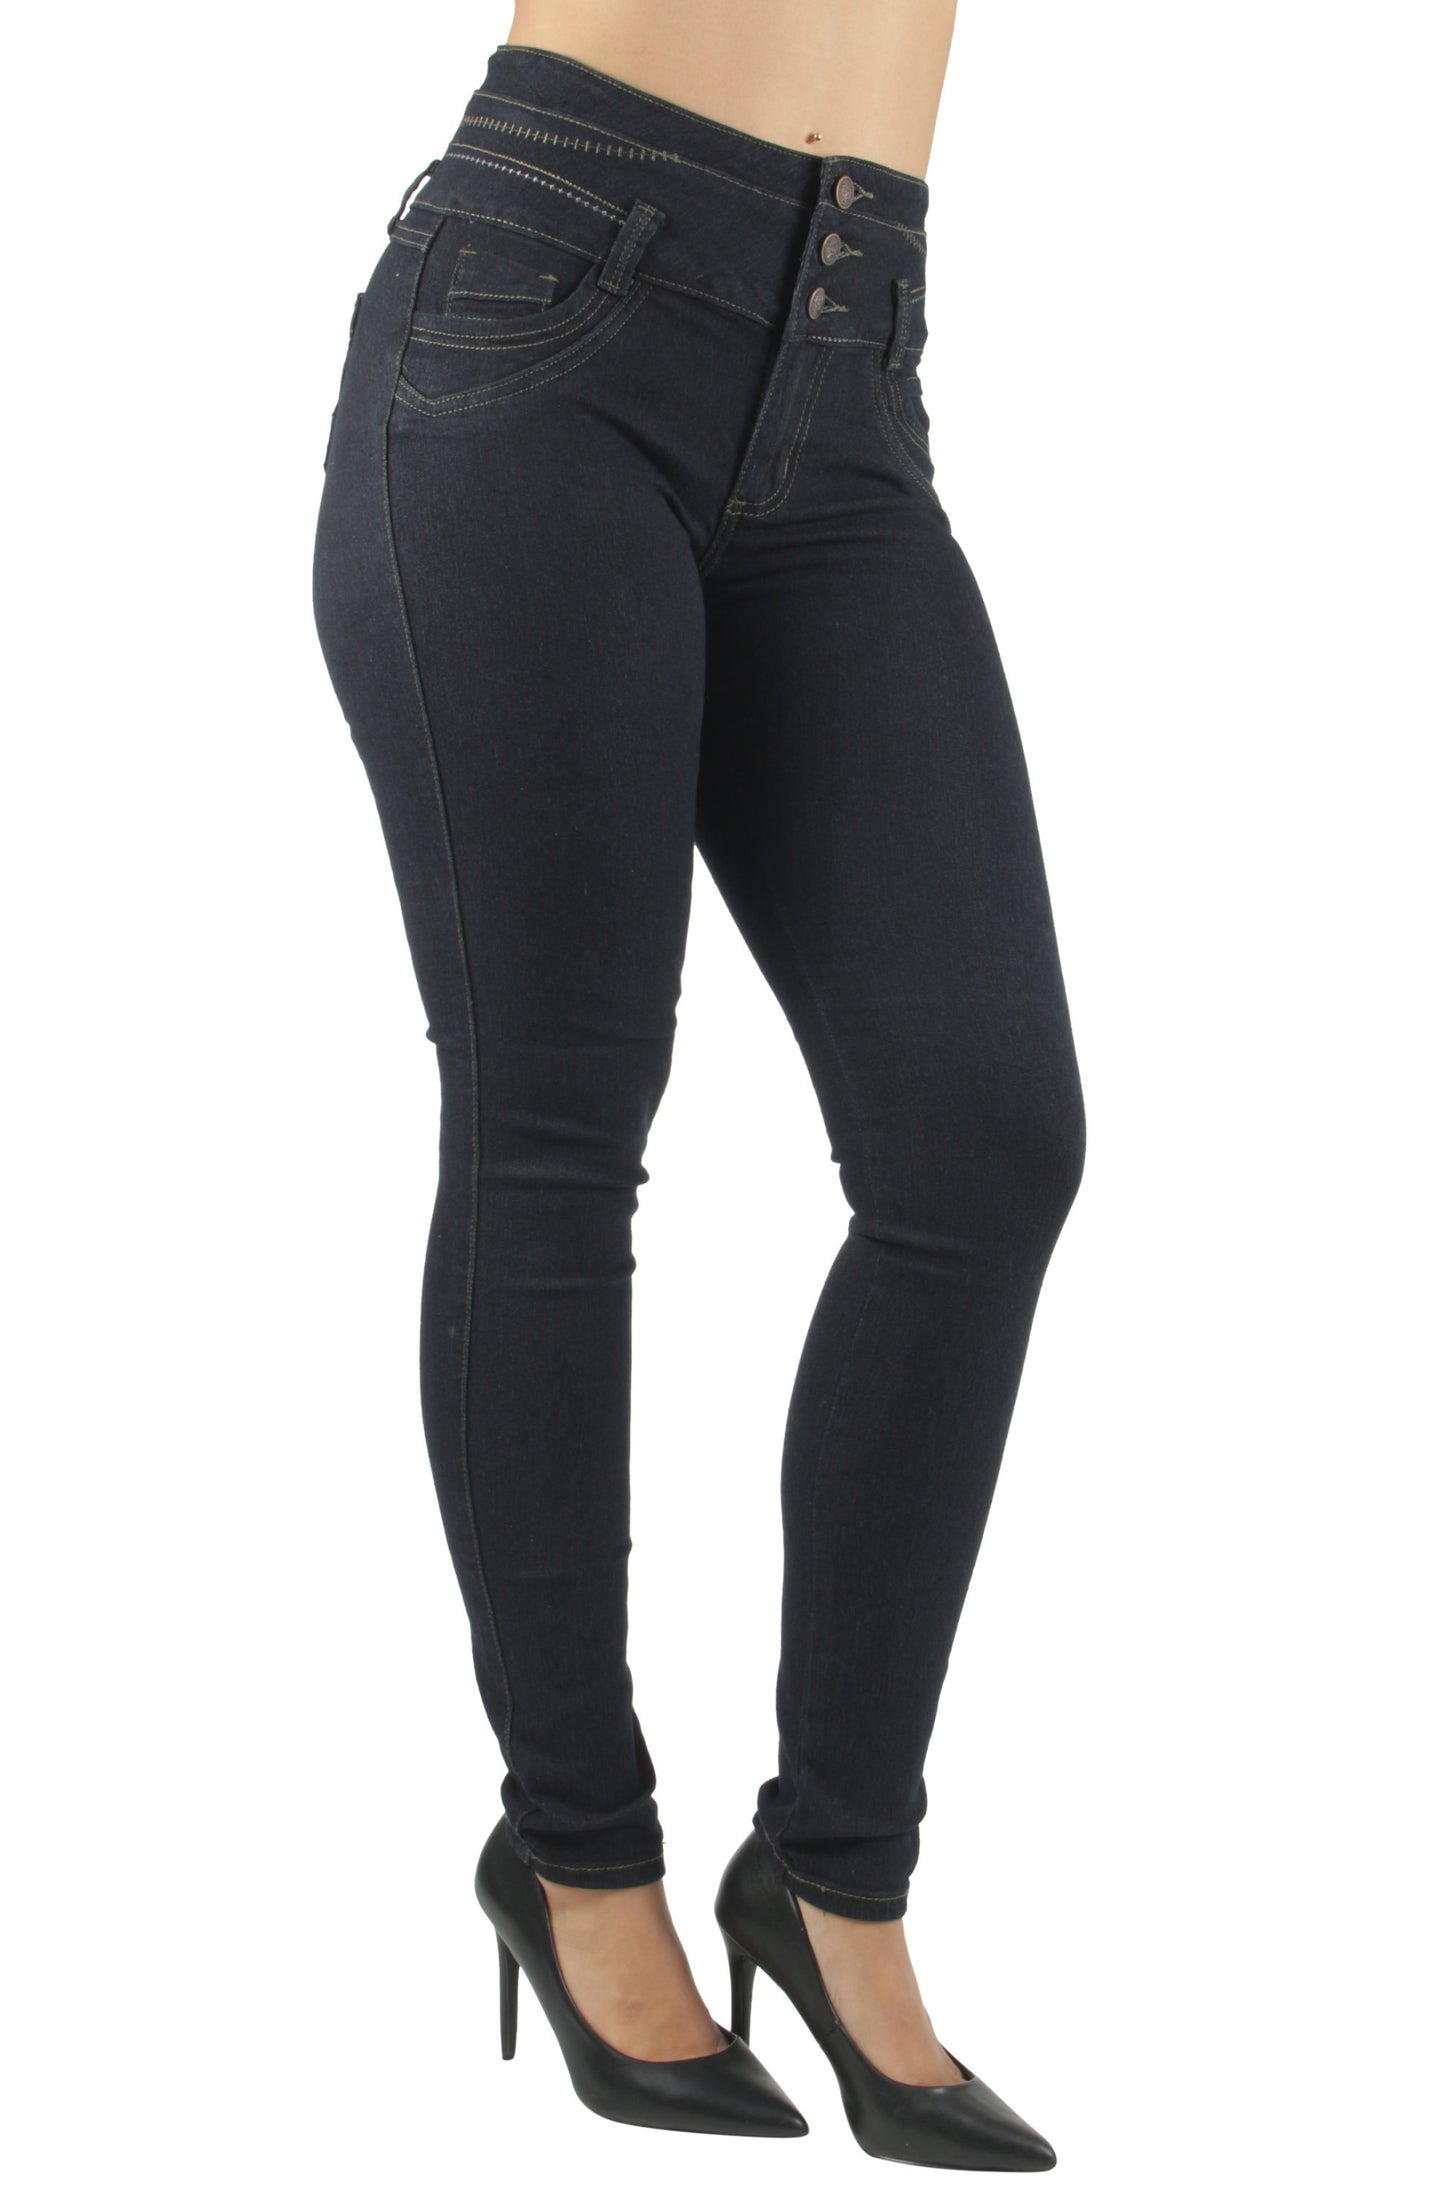 Stylish & Hot jeans levanta cola at Affordable Prices 